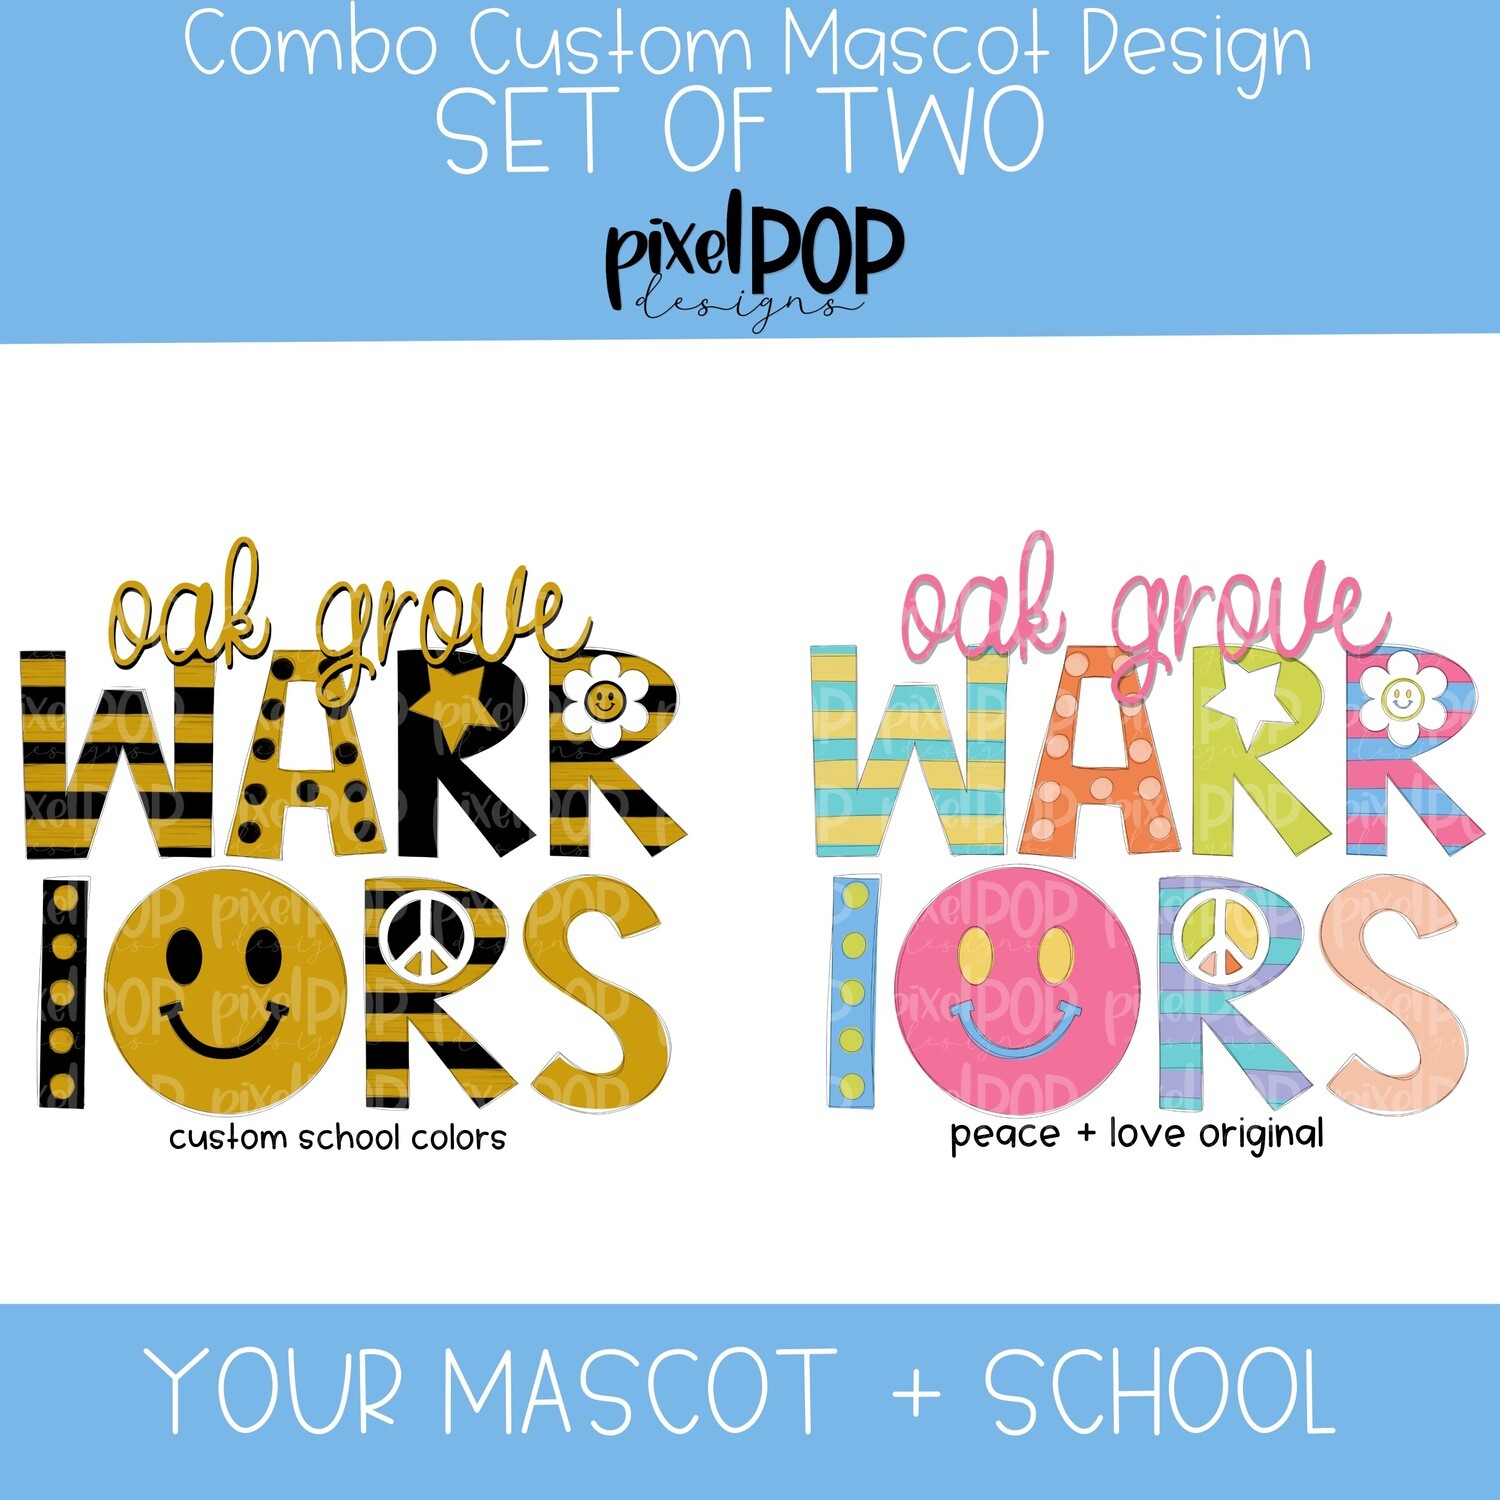 Set of TWO Mascot + School Images (Custom Colors and Peace + Love)